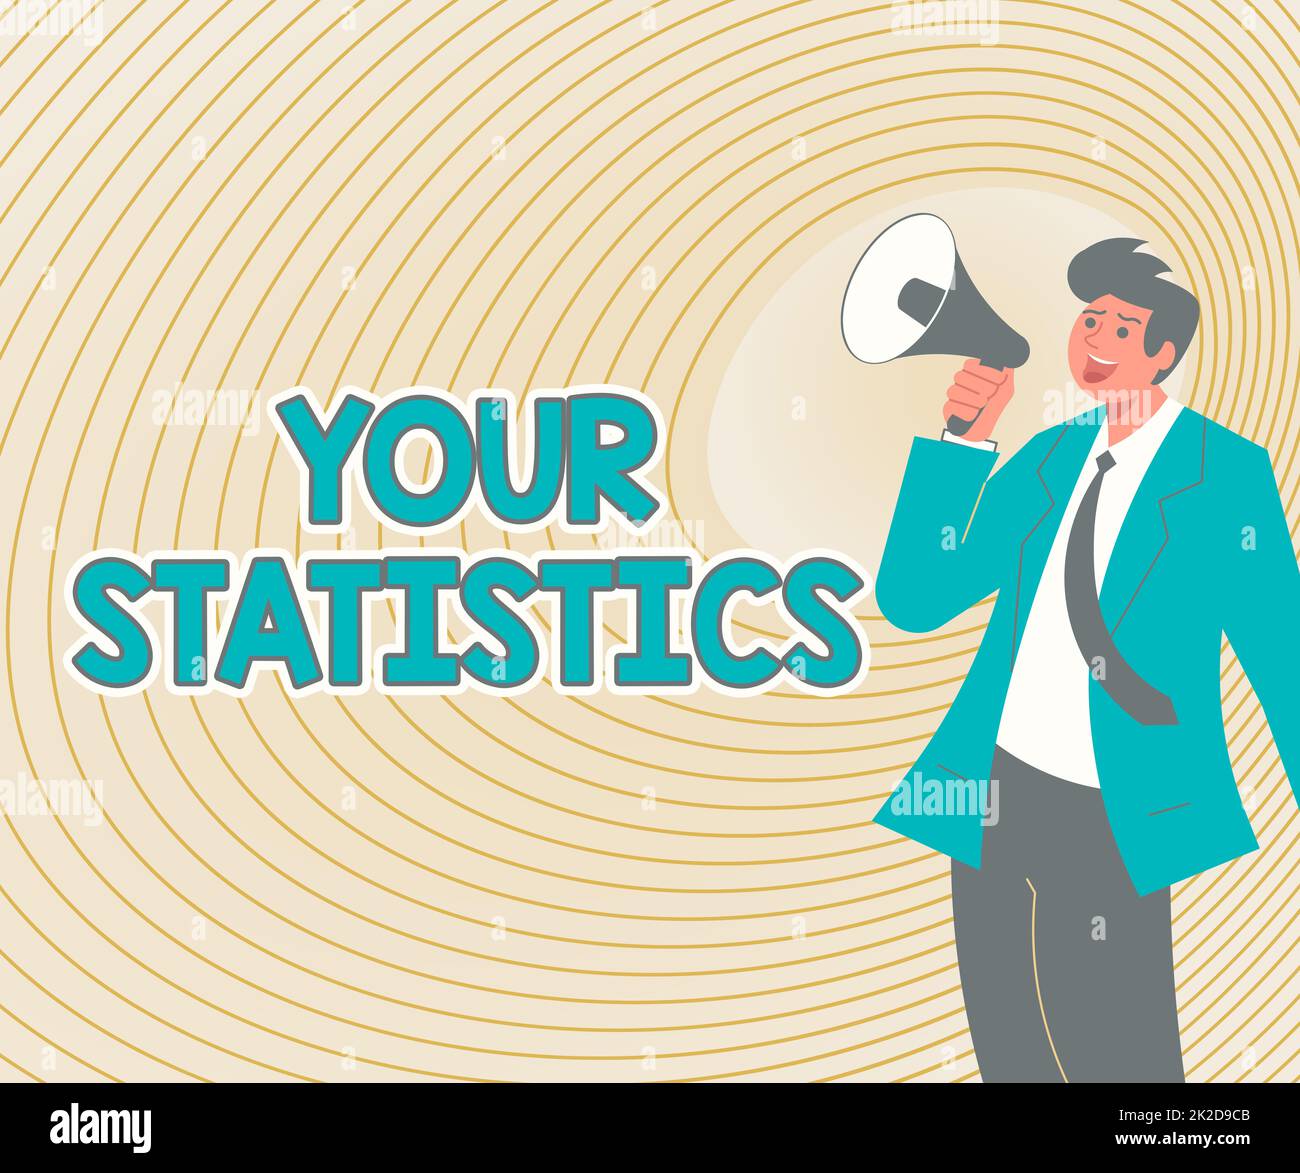 Handwriting text Your Statistics. Internet Concept Your Statistics Illustration Of A Man Pointing Away Holding Megaphone Making New Announcement Stock Photo